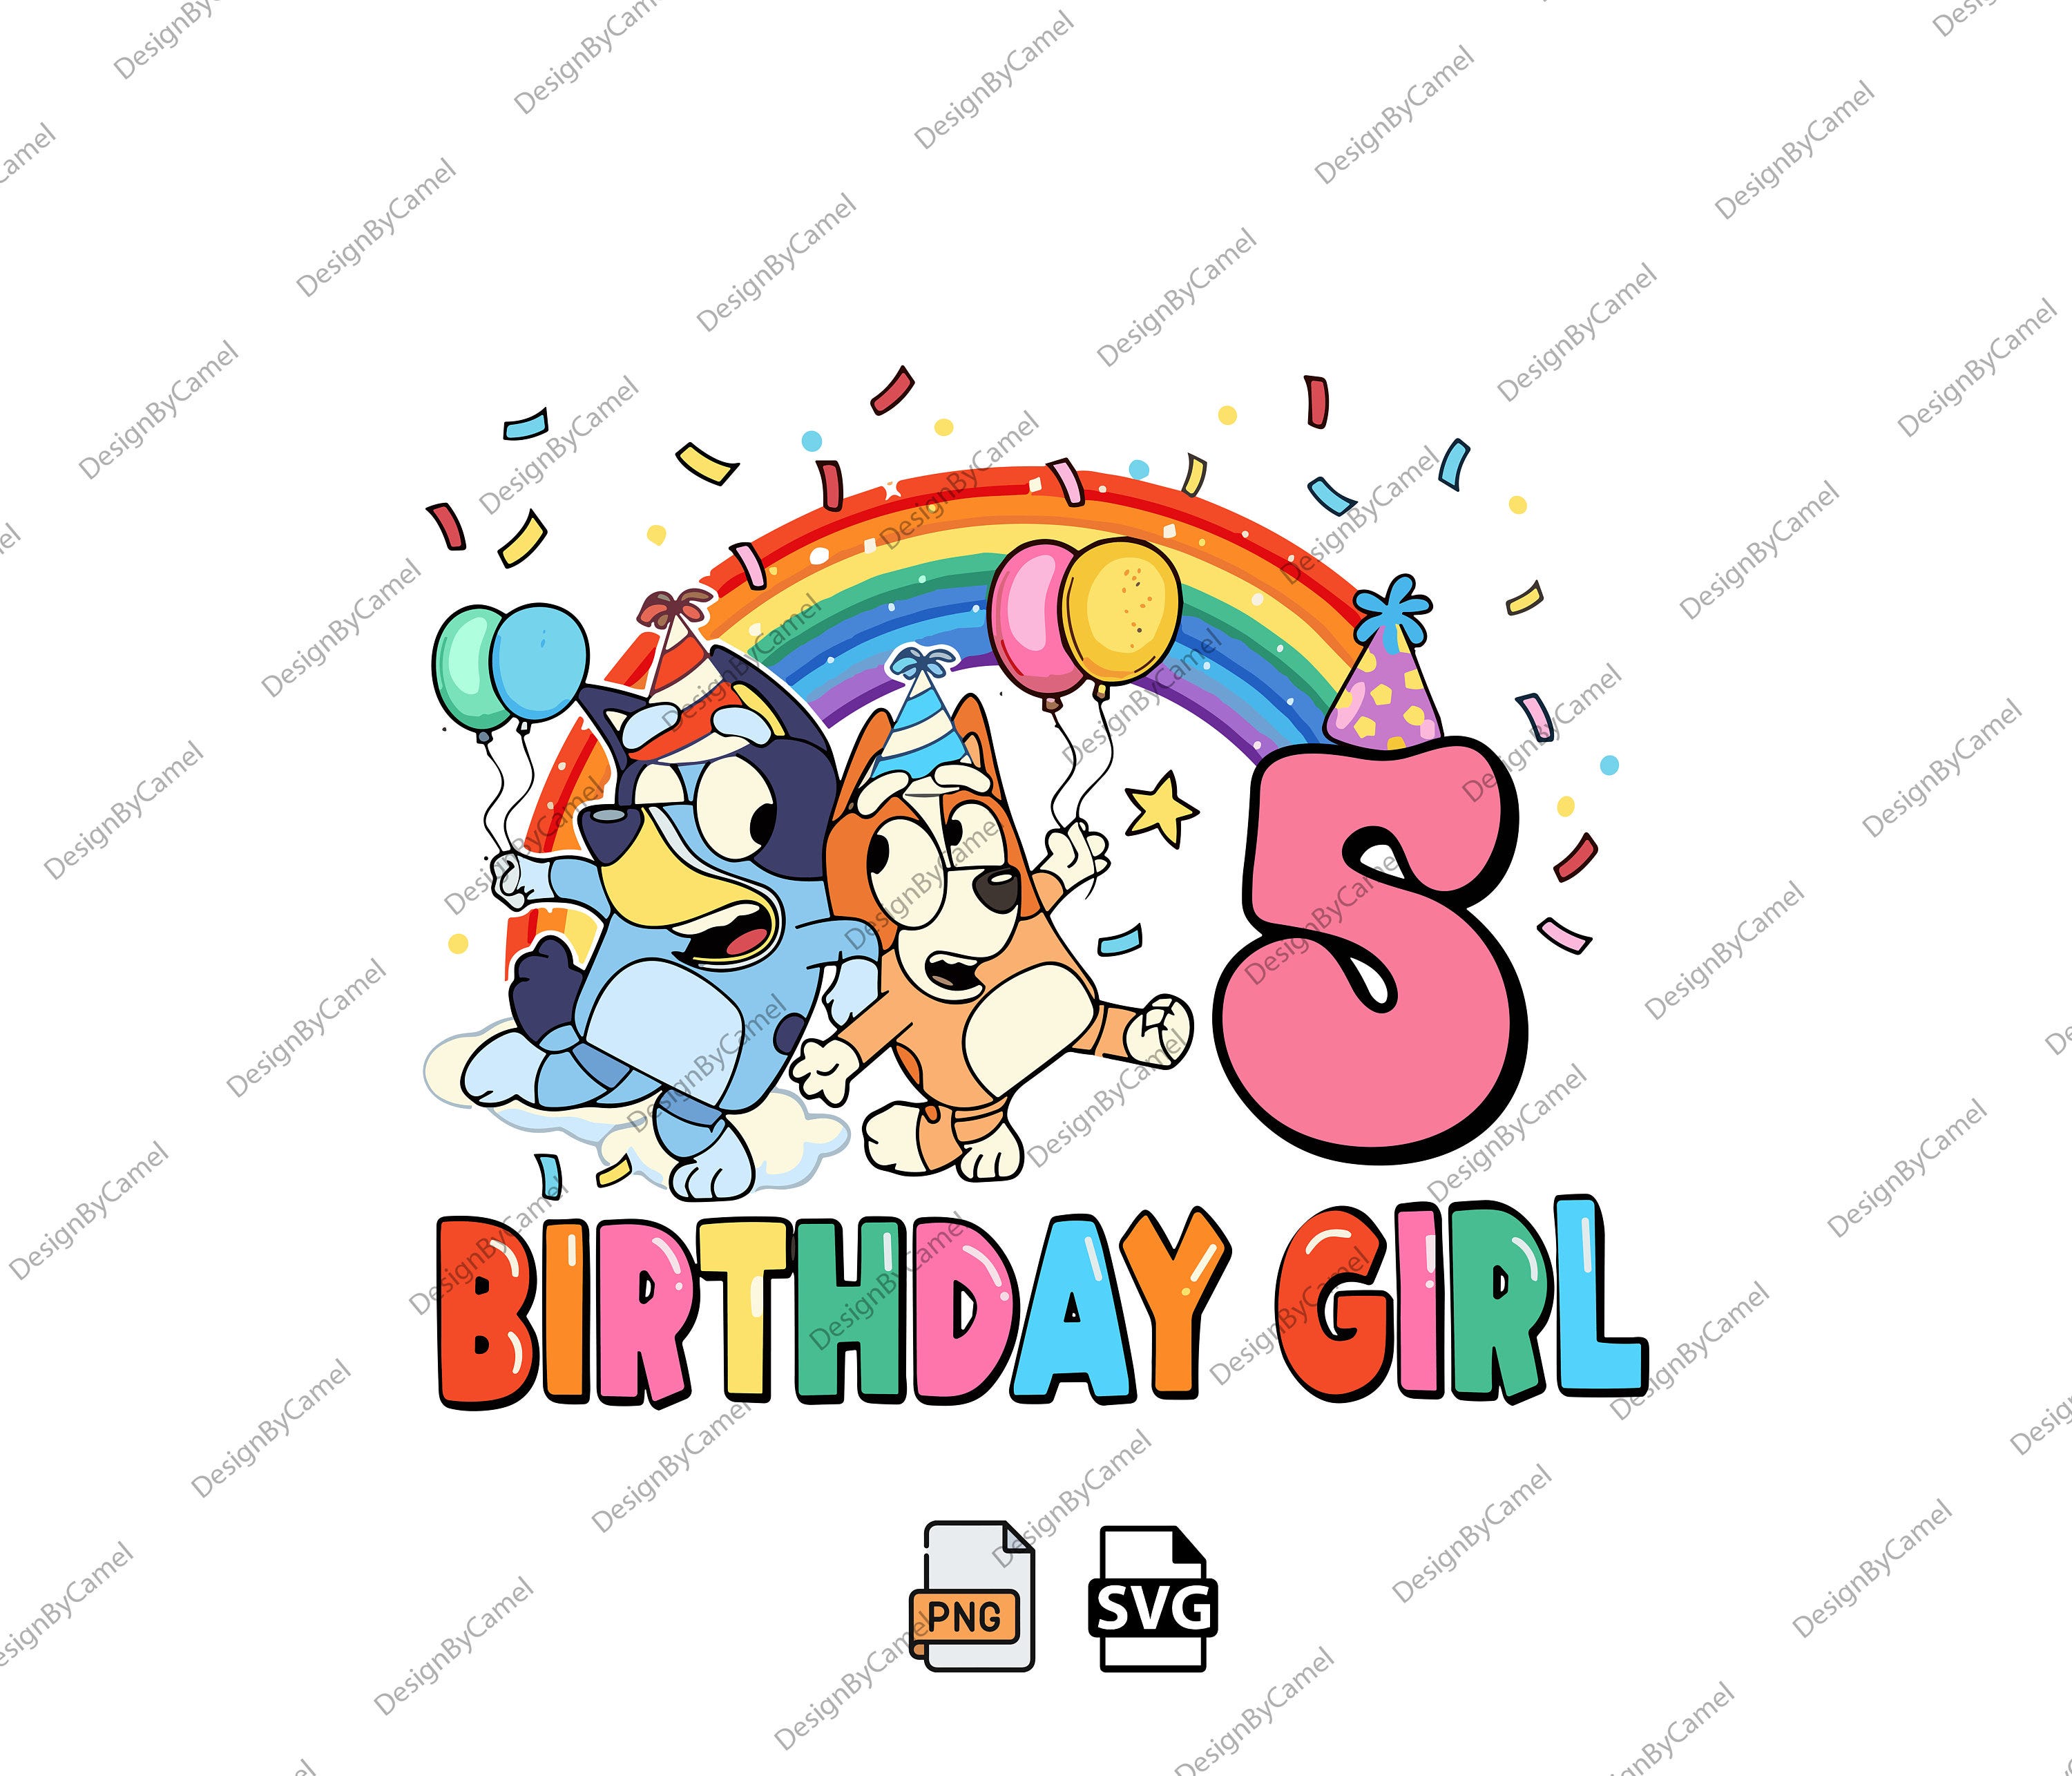 Bluey Birthday PNG, Birthday Girl Png, Bluey Png, Bluey Png File, Bluey Party Png, Bluey Family png, Bluey Dogs Png